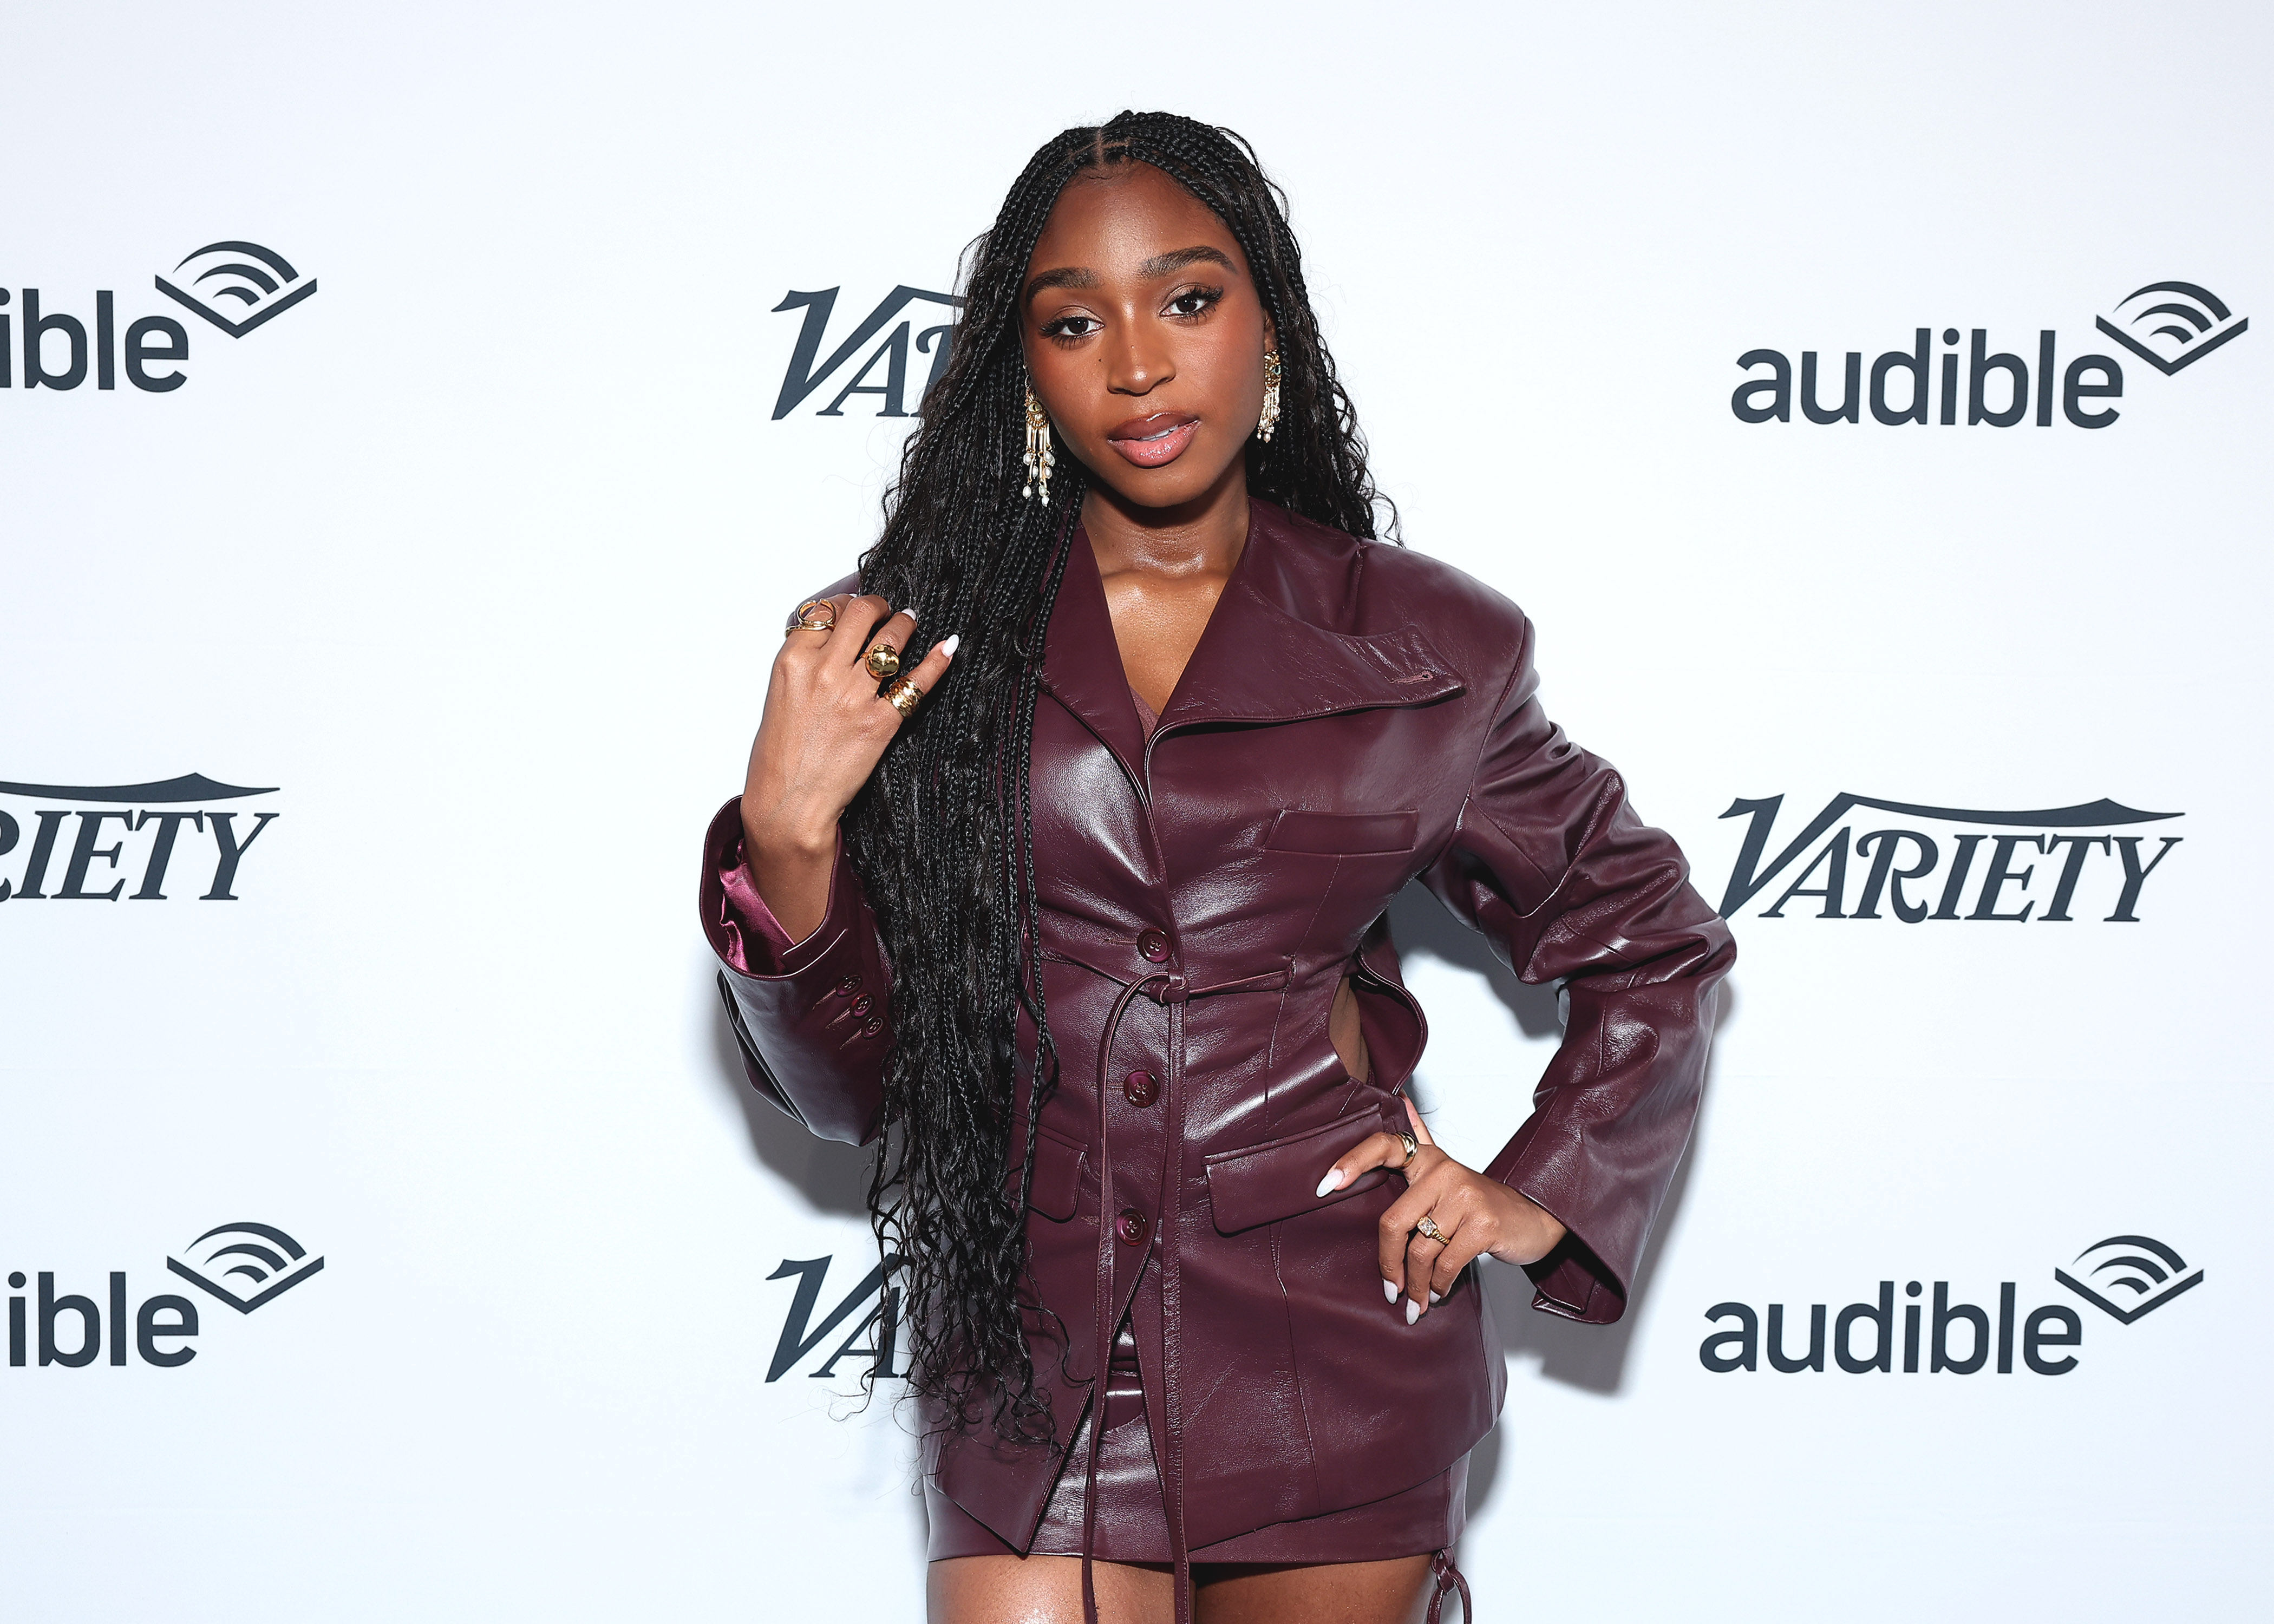 Normani side-stepped the accusation